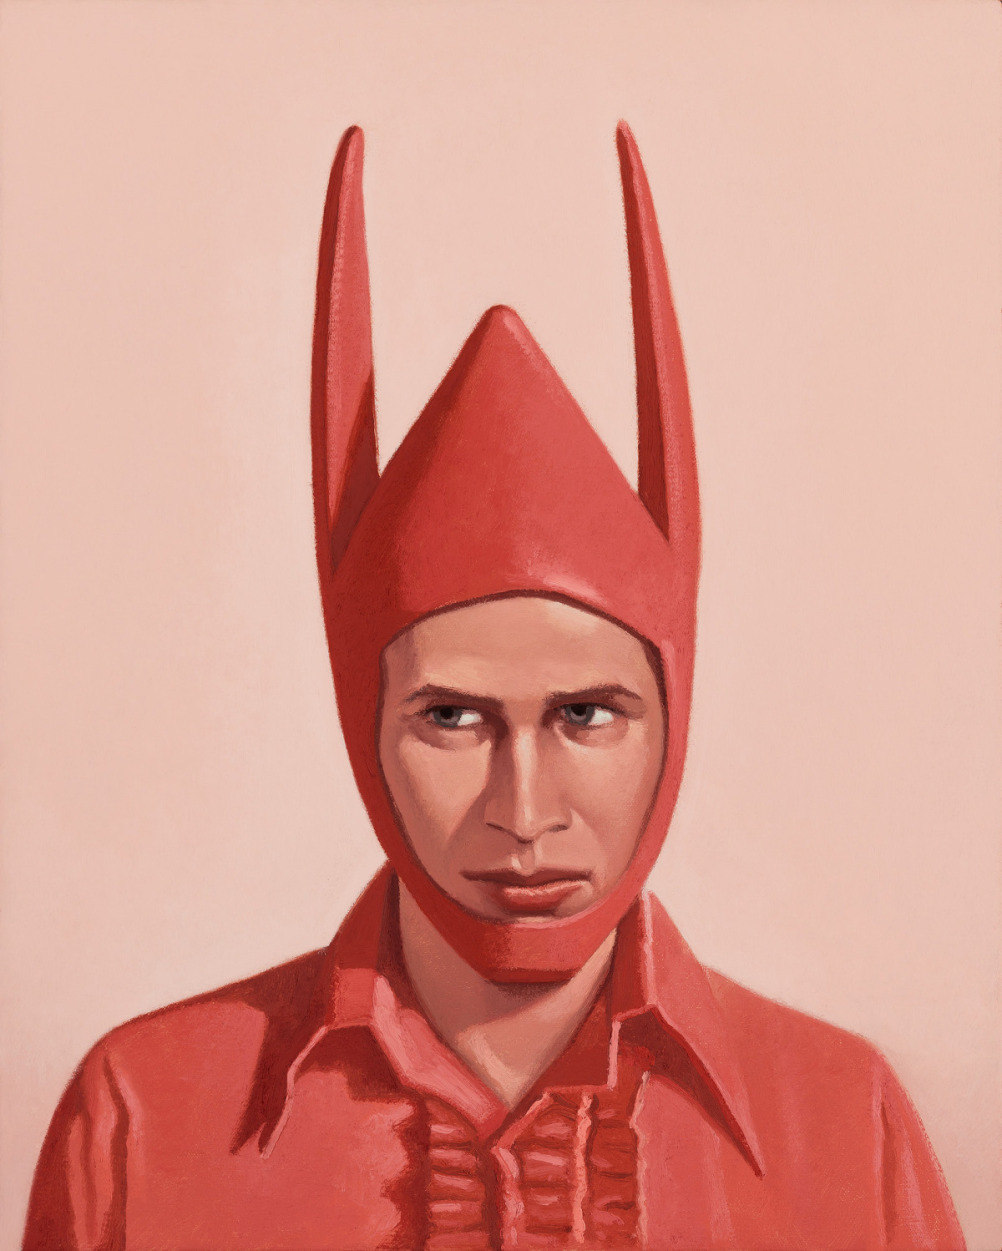 the+fool+2013+oil+on+canvas+20x16+inches